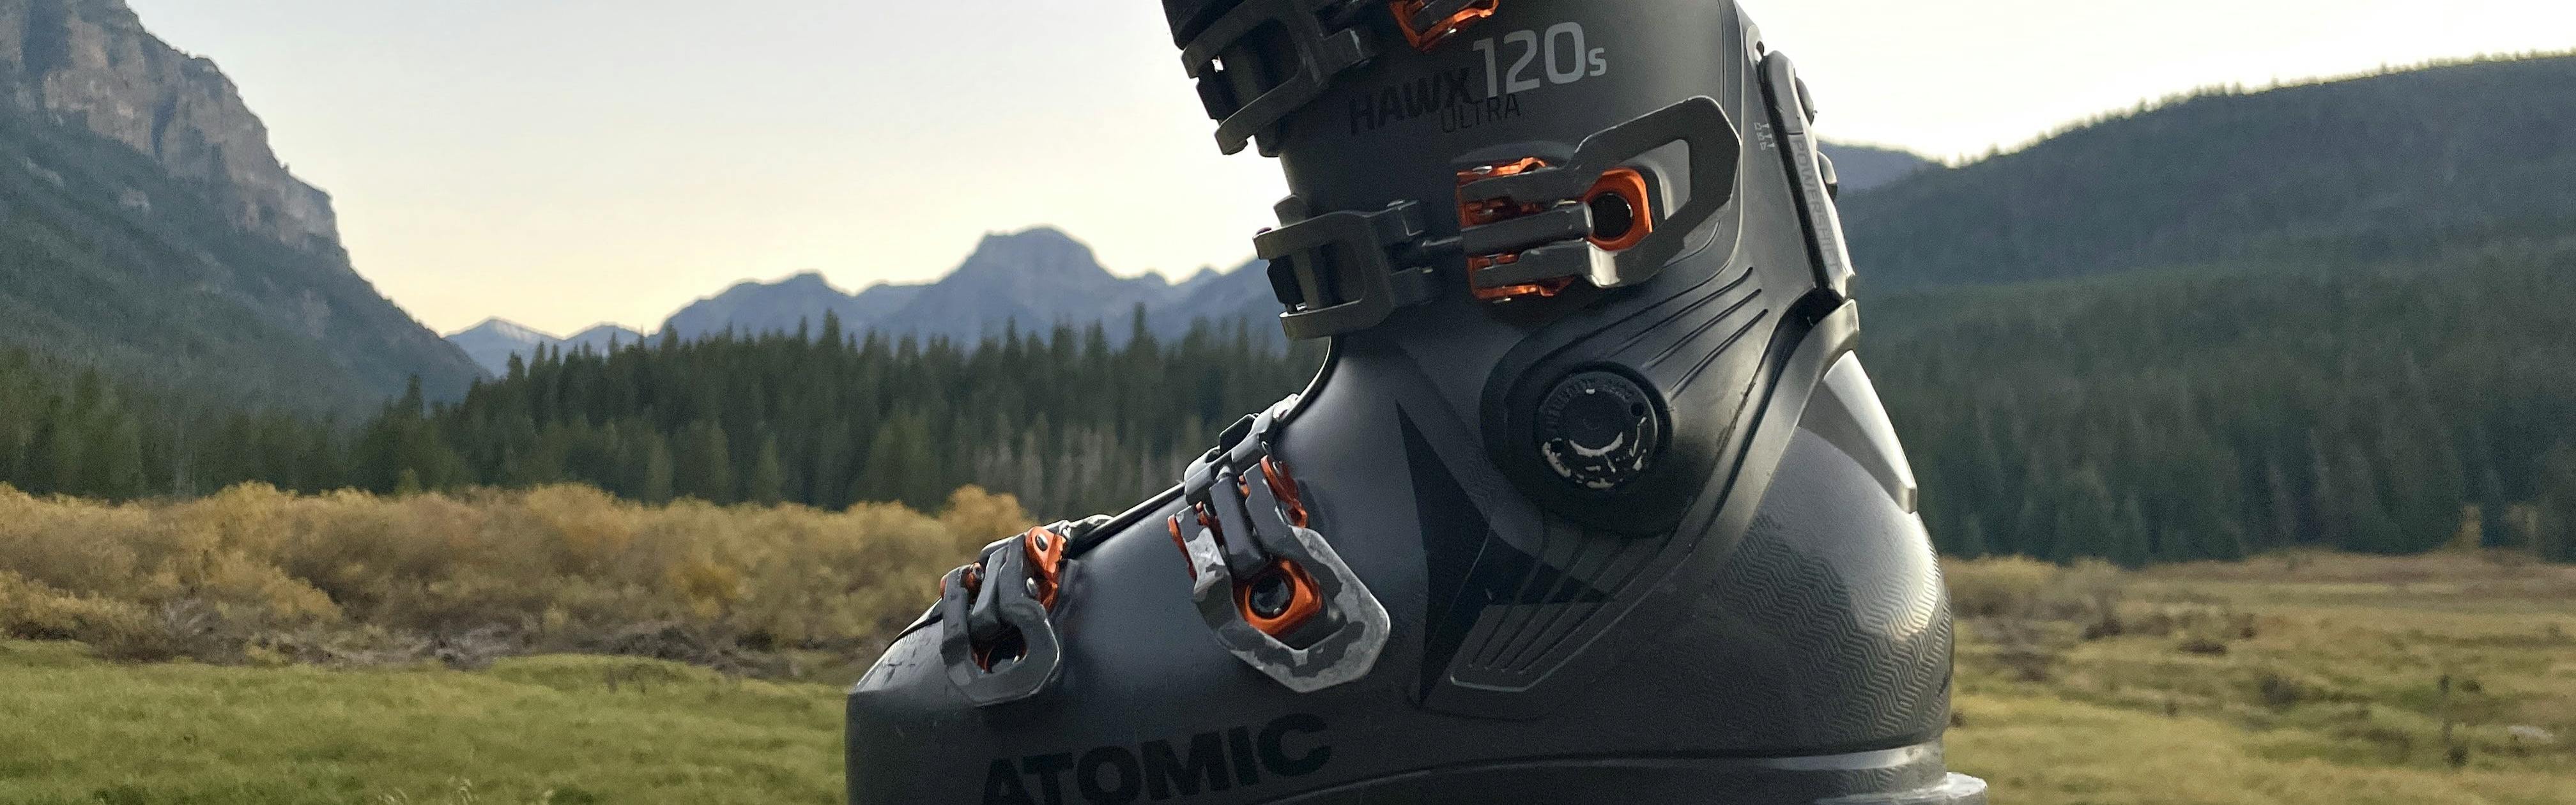 Ashley Furman stap in Nadenkend Expert Review: Atomic Hawx Ultra 120 S Ski Boots · 2020 | Curated.com